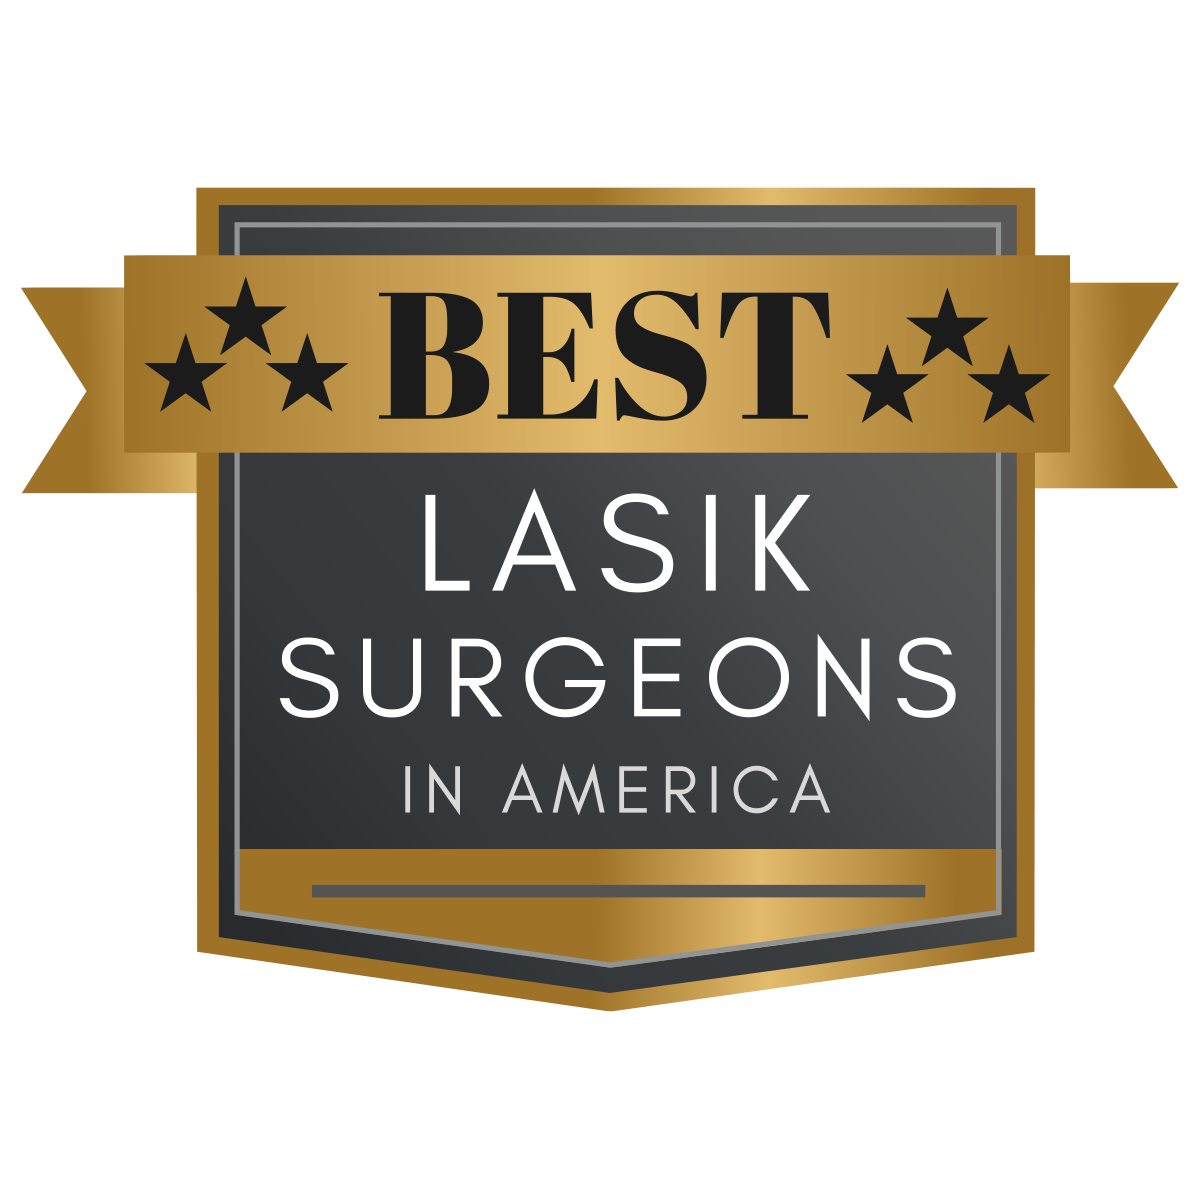 Best Lasik Surgeon in America - Rated By the American college of Elective Surgery 